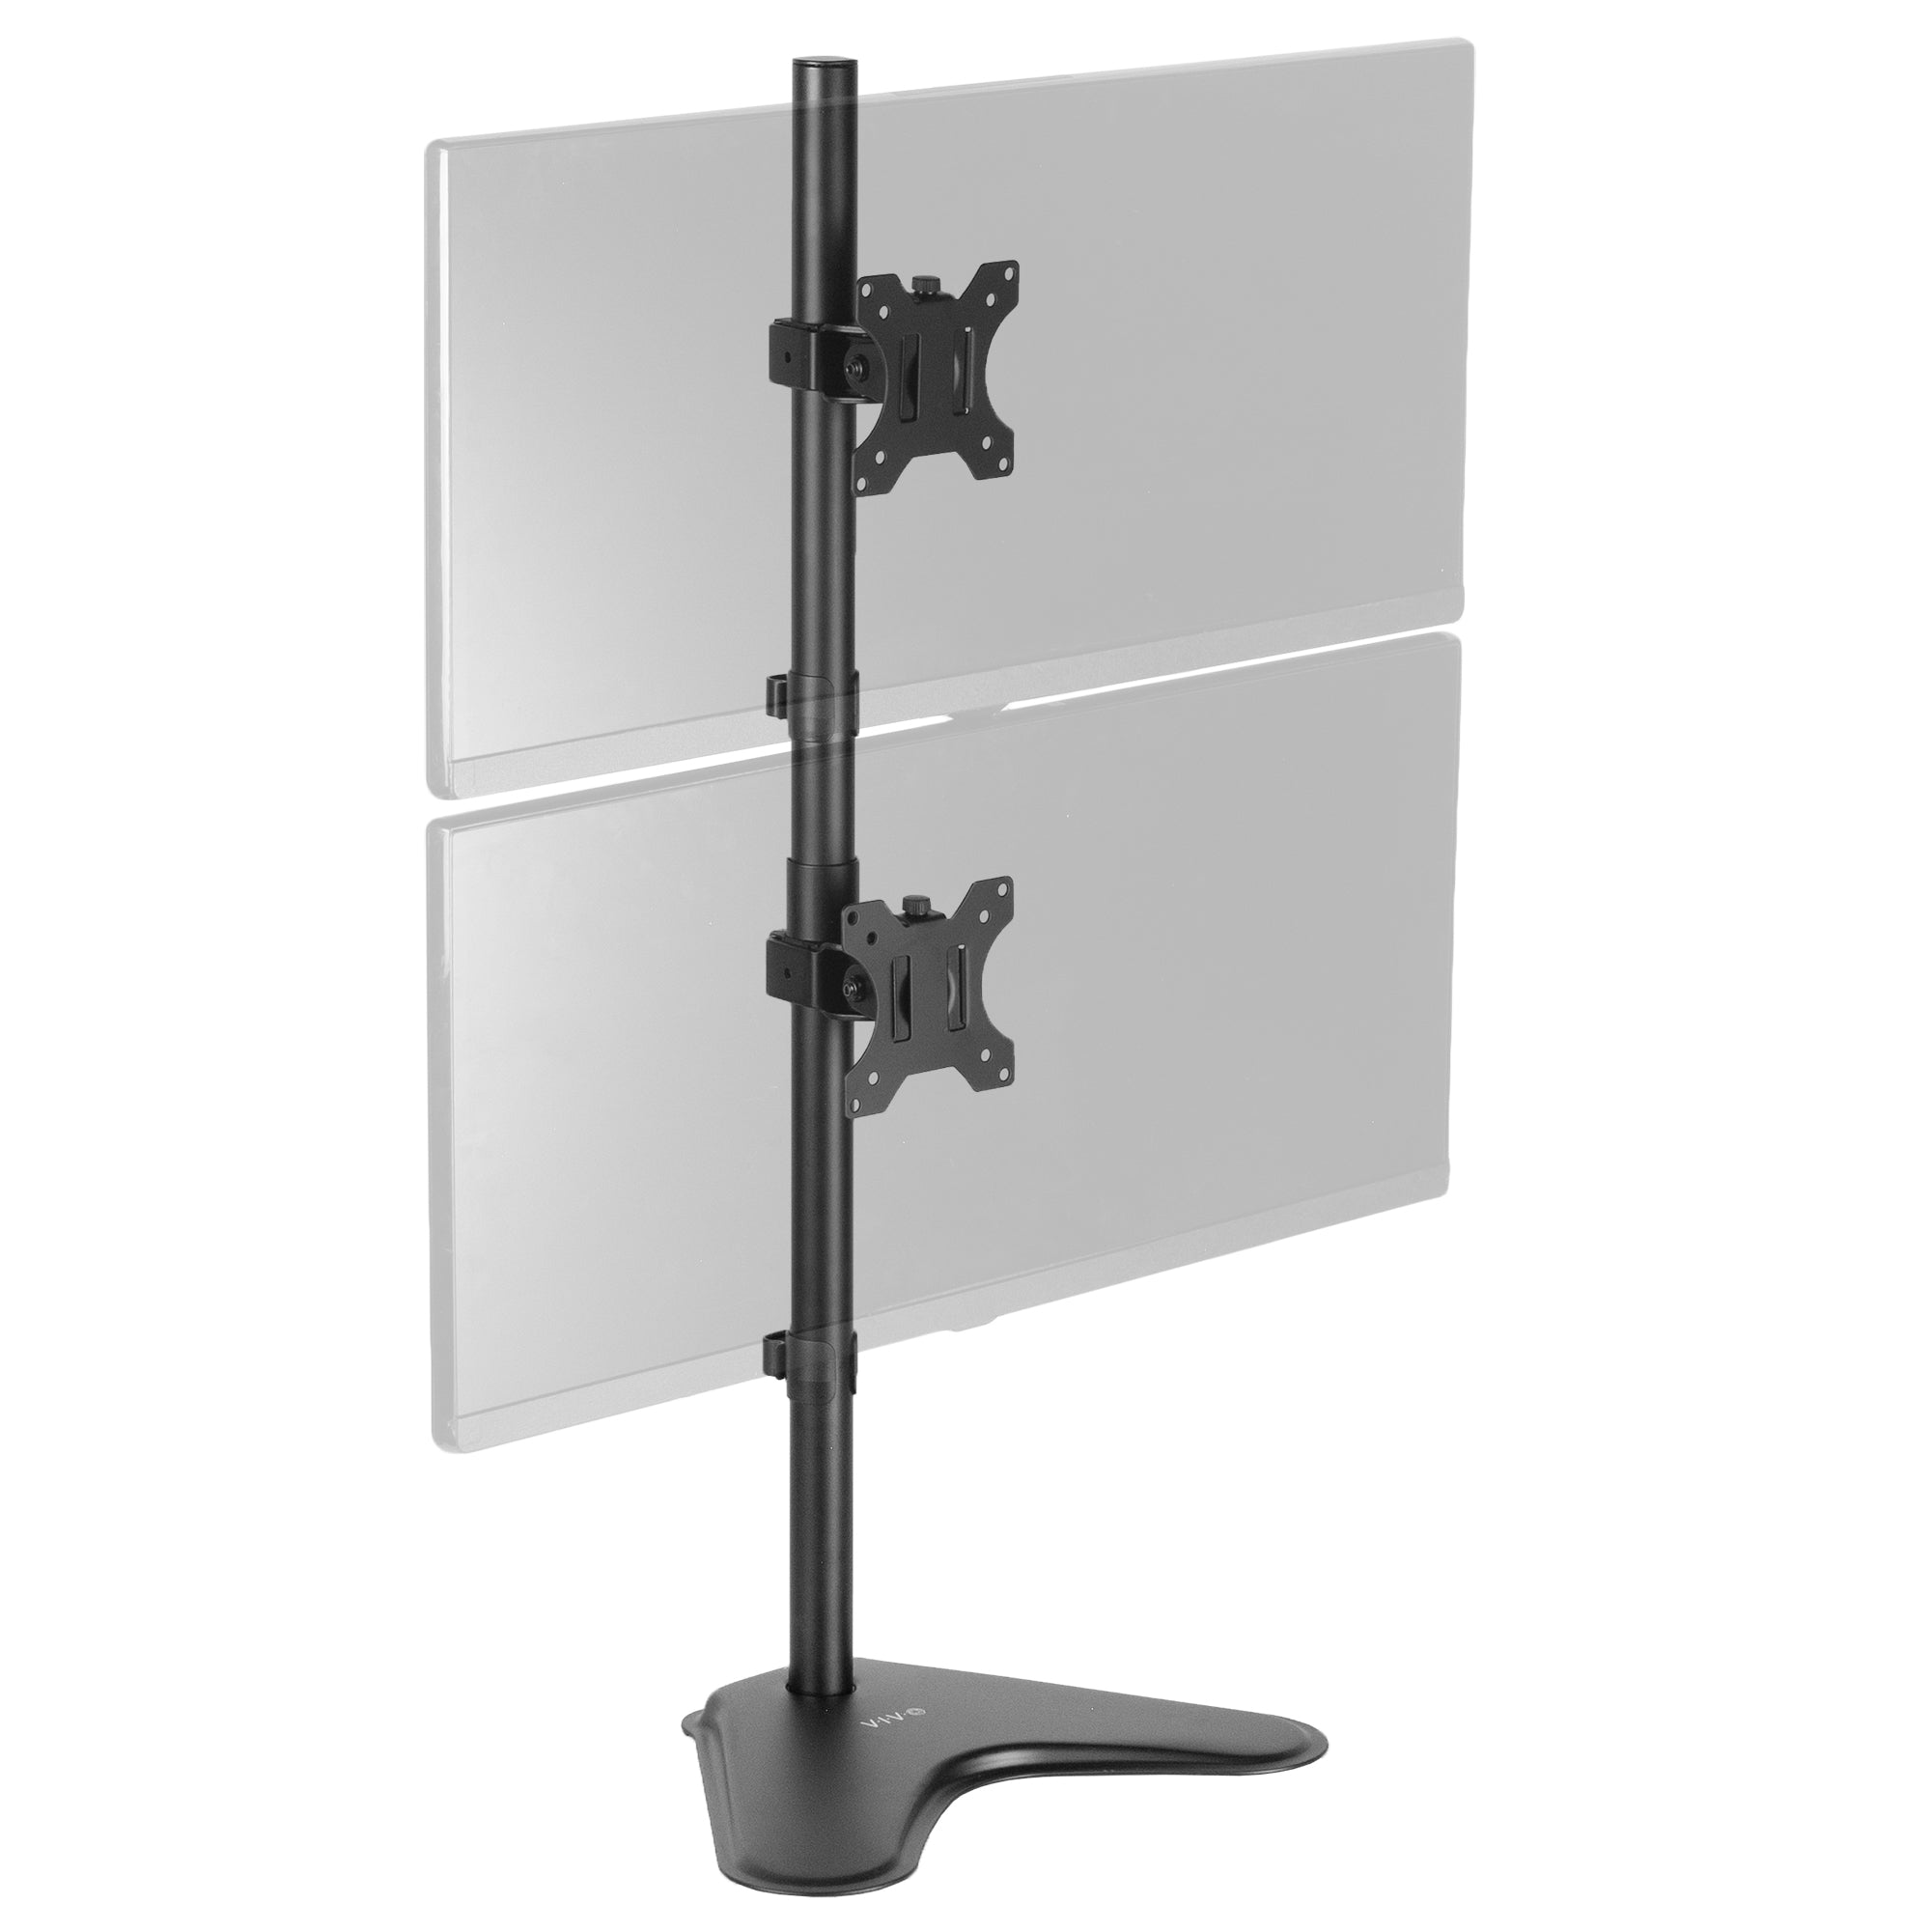 vivo Dual LCD Monitor Desk Vertical Stand Mount | Fits 2 Screens Up to 30